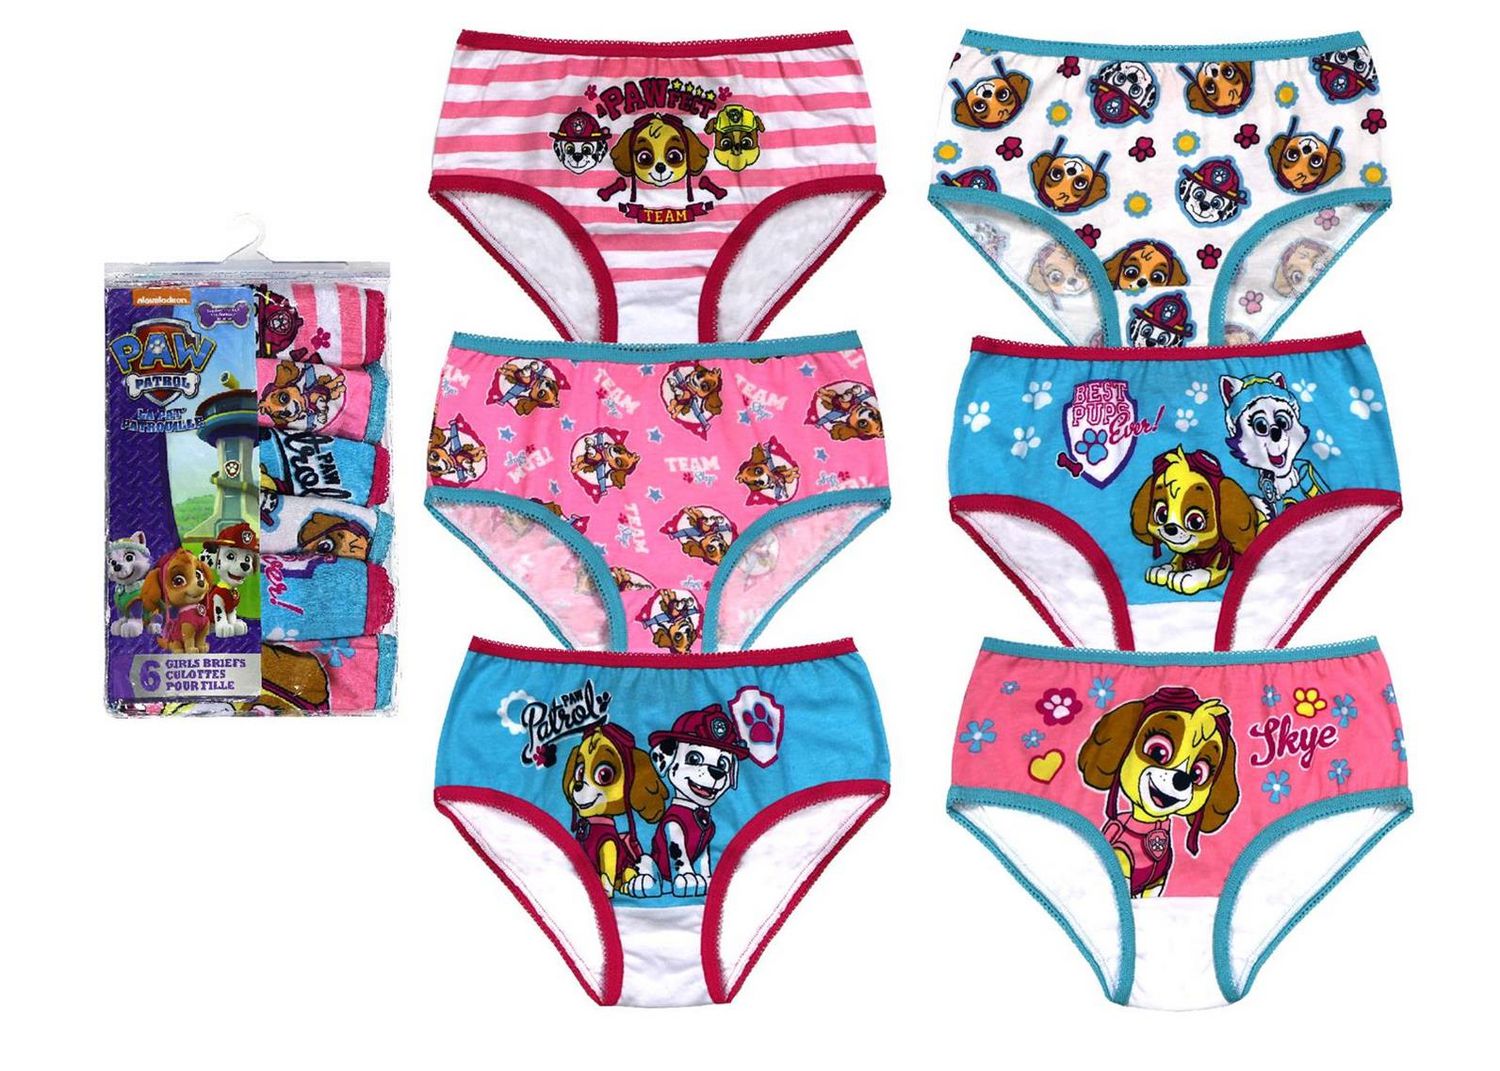 Find more 6pr 4t Paw Patrol Underwear for sale at up to 90% off